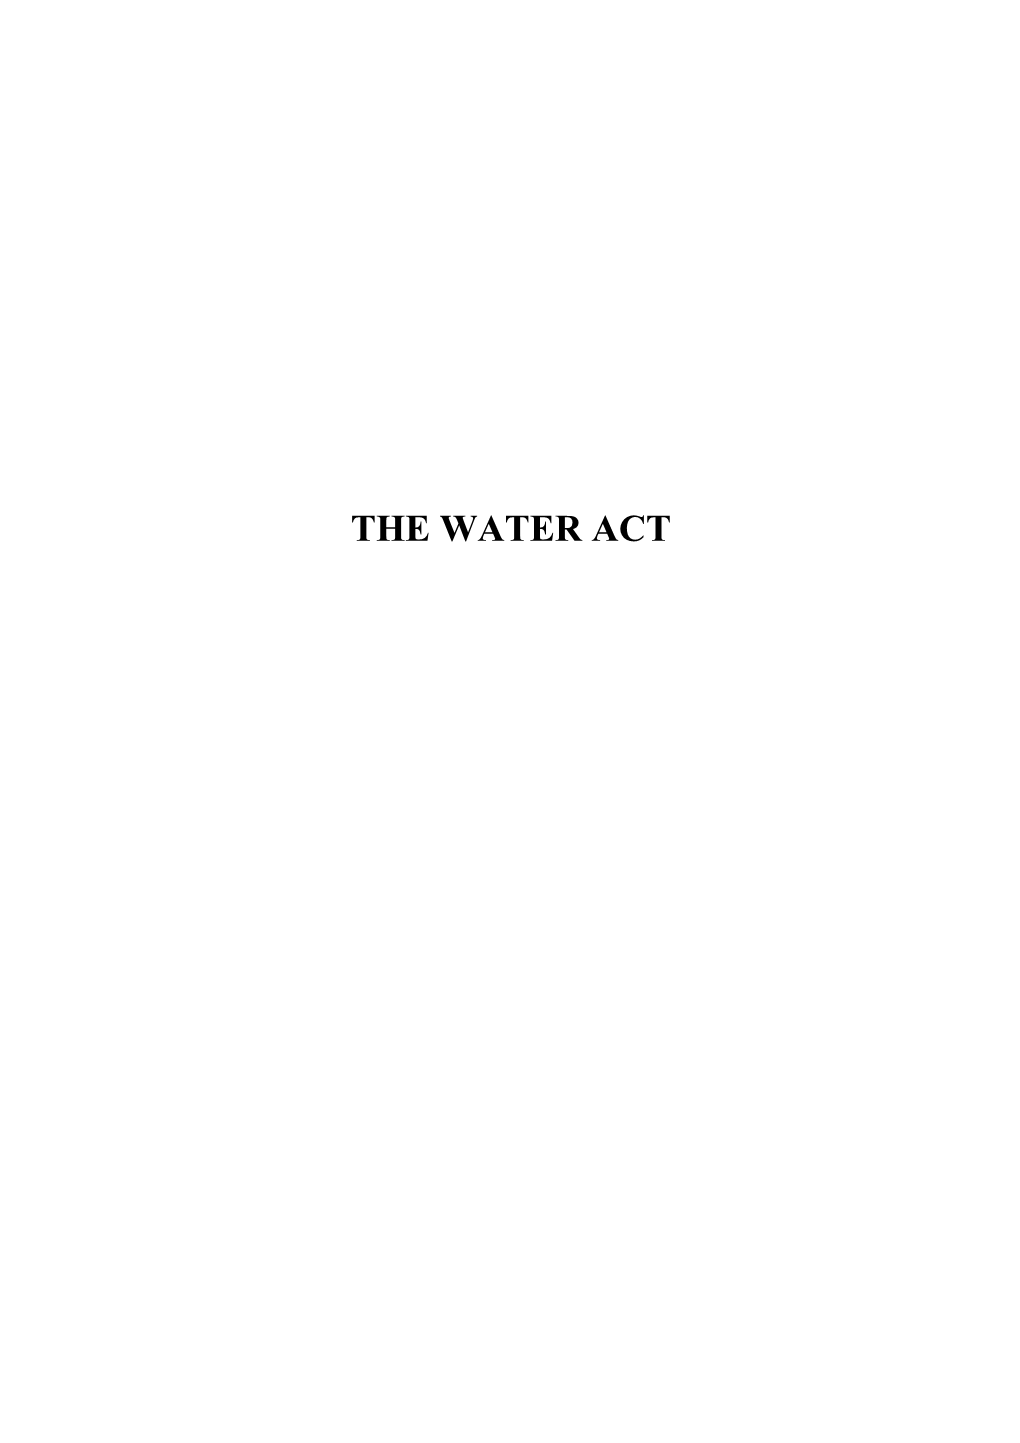 On Water and Amendments to Some Acts (The Water Act)